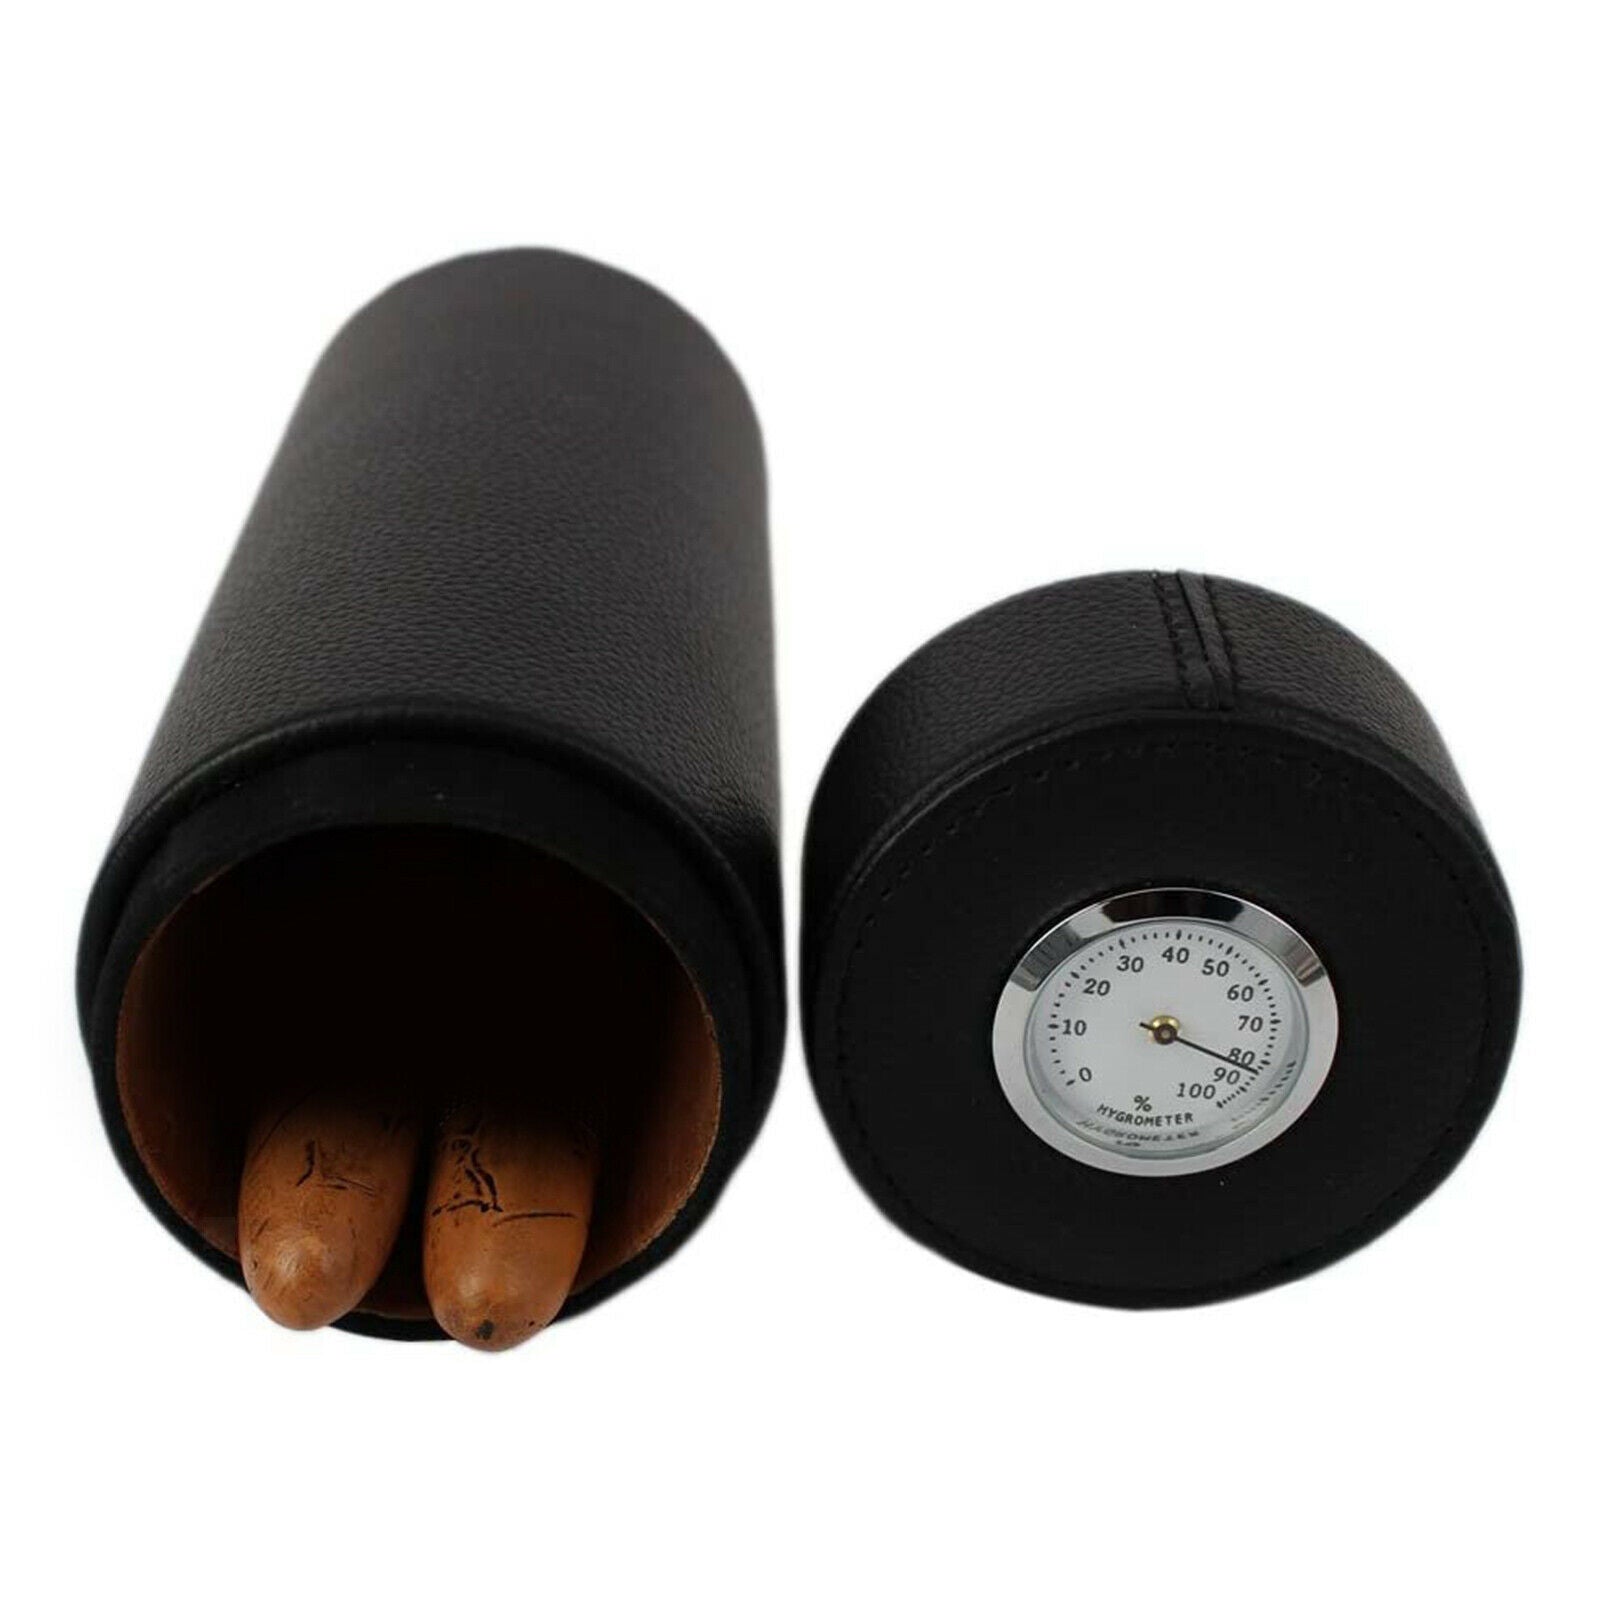 Portable Leather Cigar Humidor Hold 5-8 Cigars Carrying Holder Gift for Men